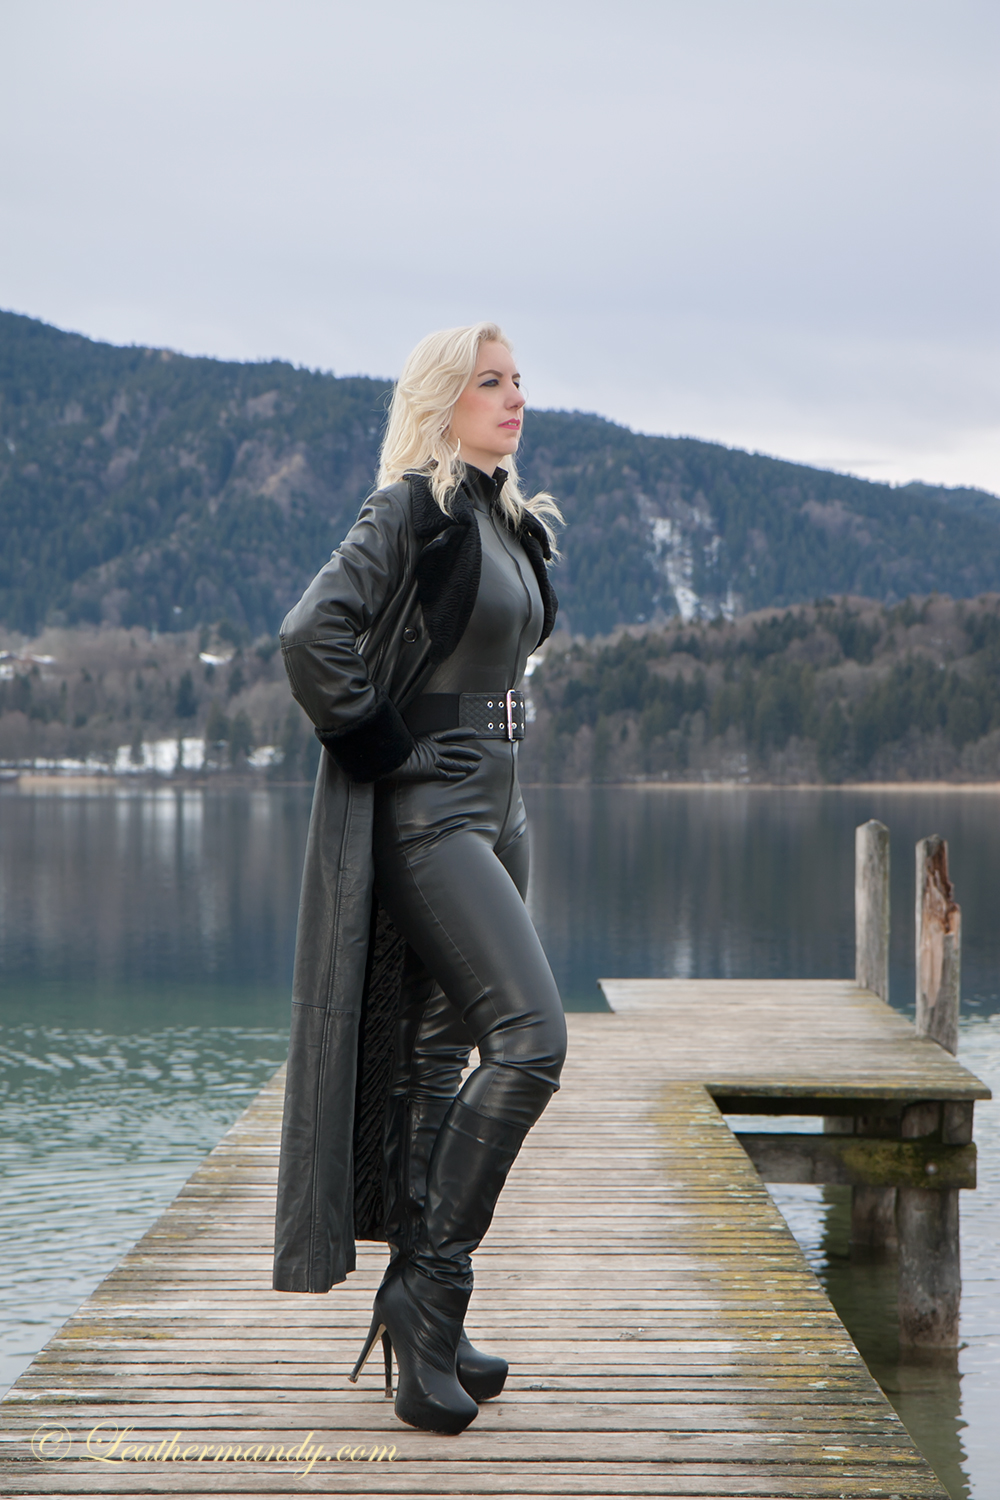 Leathermandy Preview Bild Gallery 466